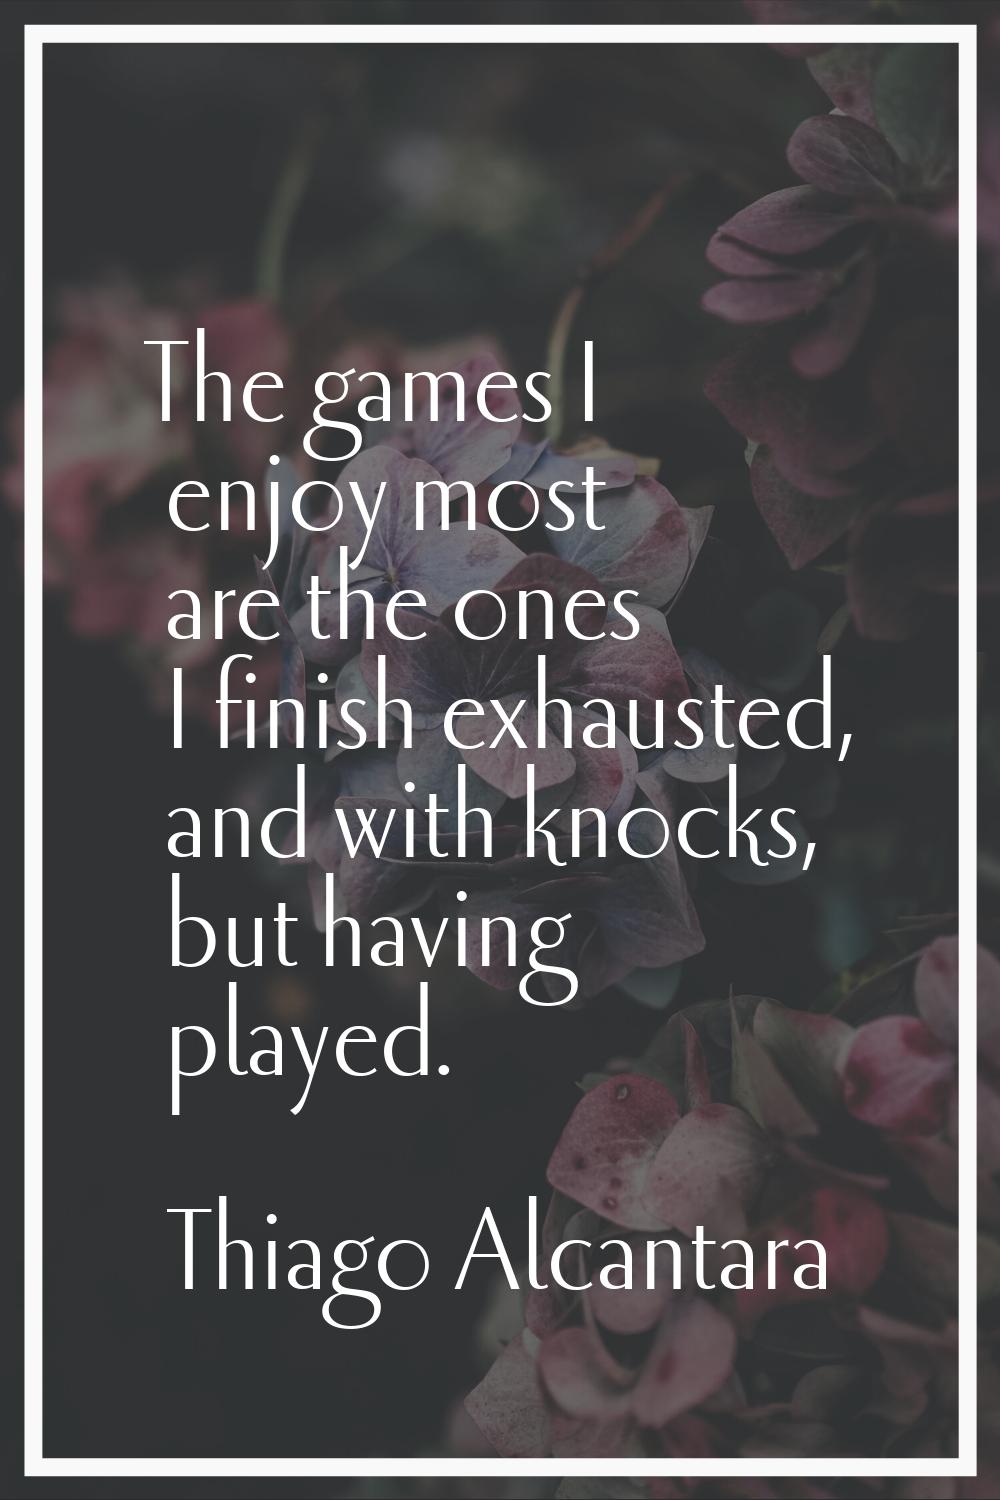 The games I enjoy most are the ones I finish exhausted, and with knocks, but having played.